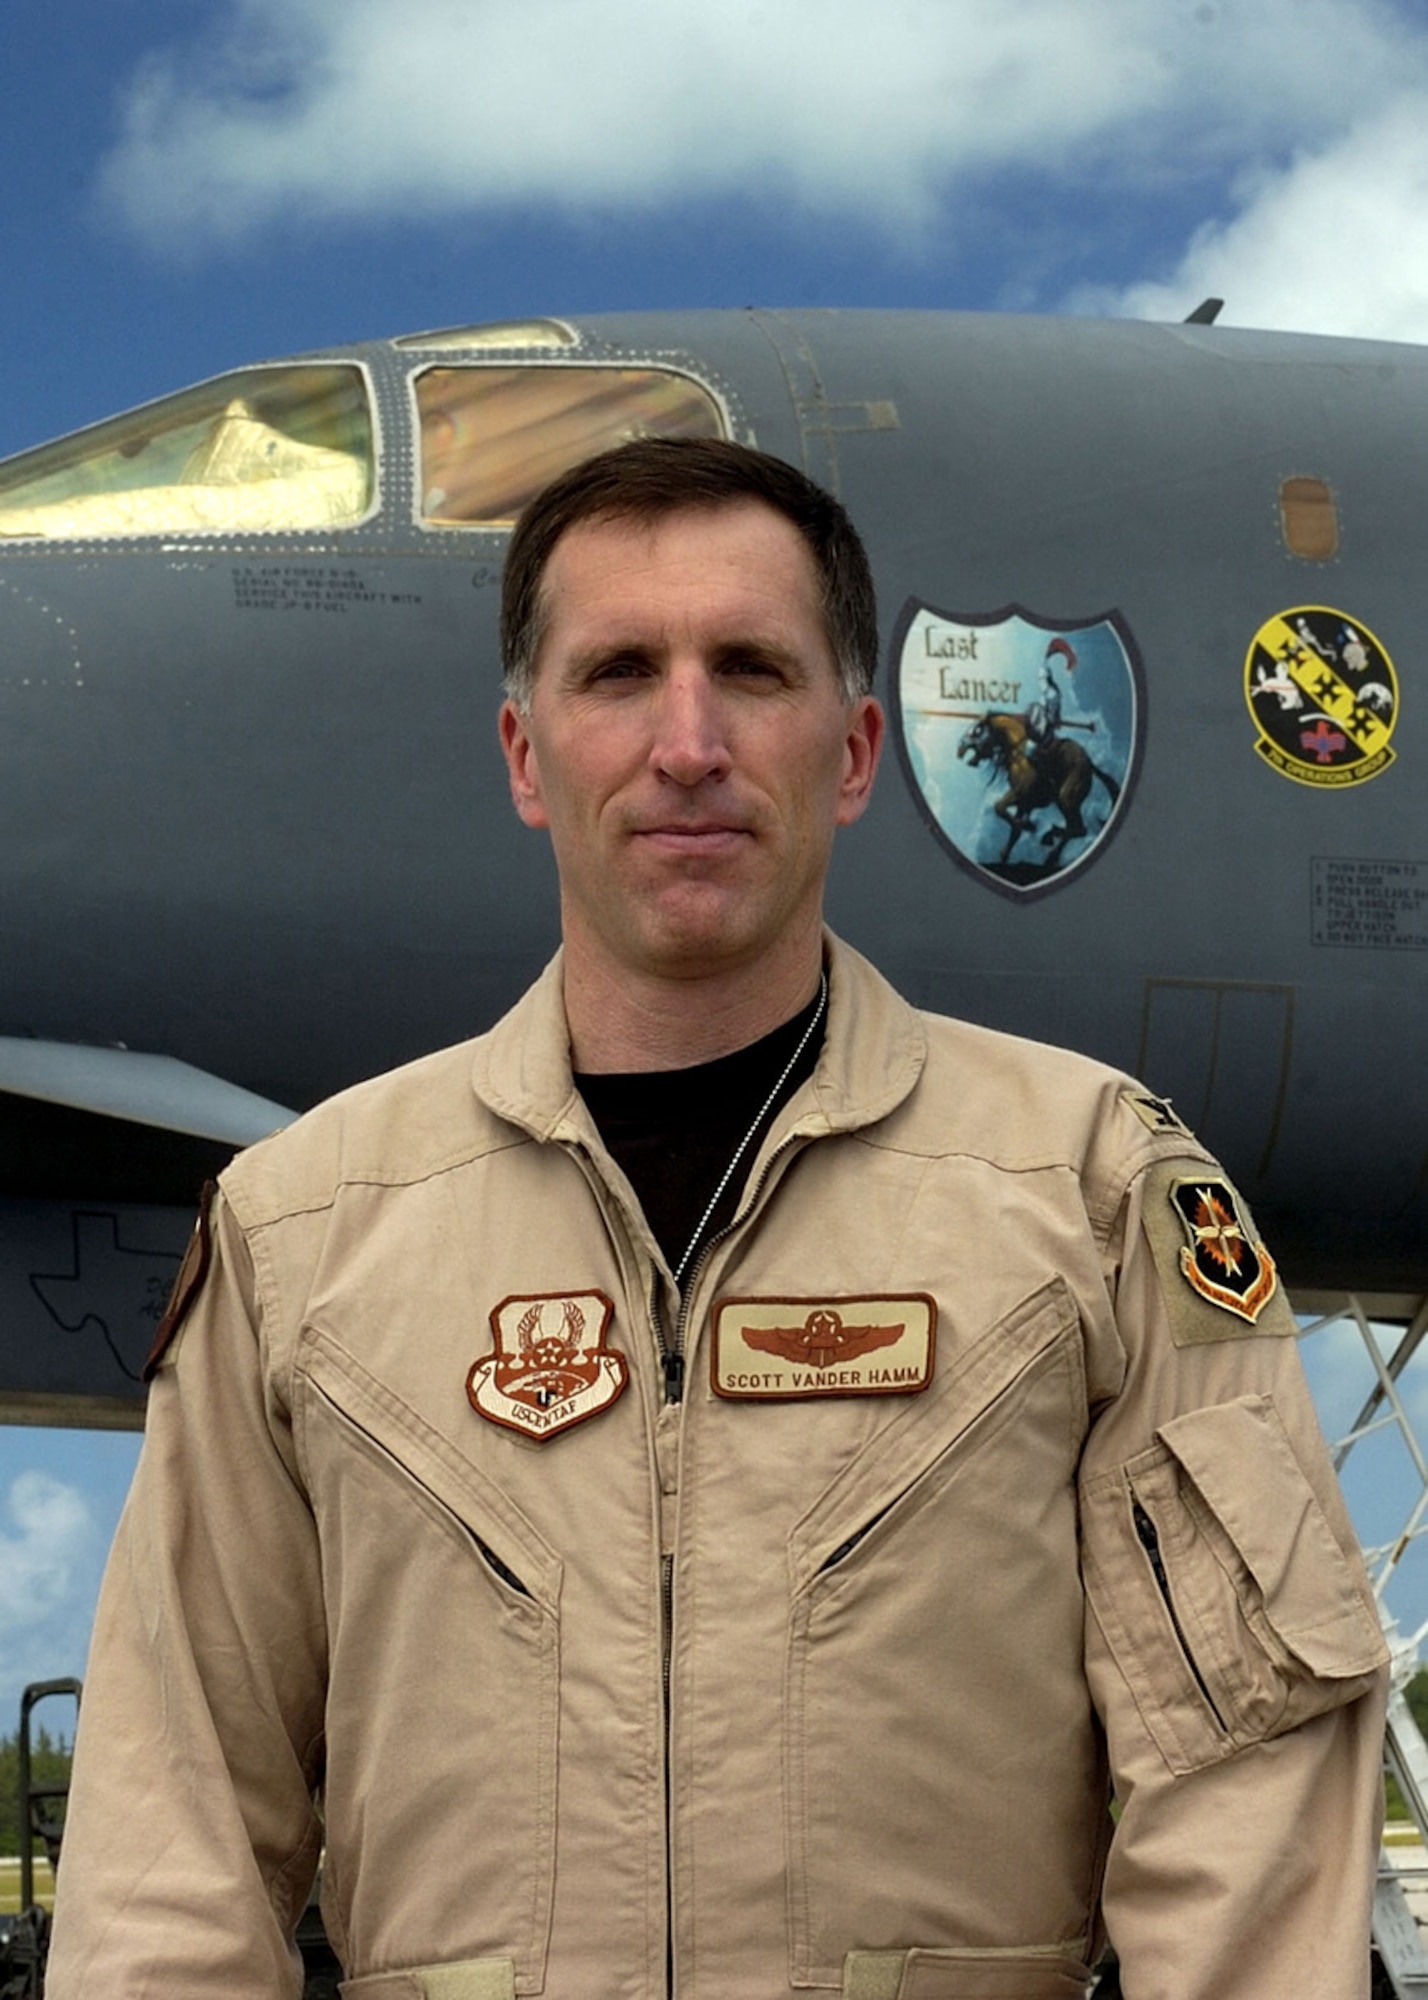 Colonel Scott Vander Hamm, 40th Air epeditionary Group commander, reached 4,000 flying hours June 9.